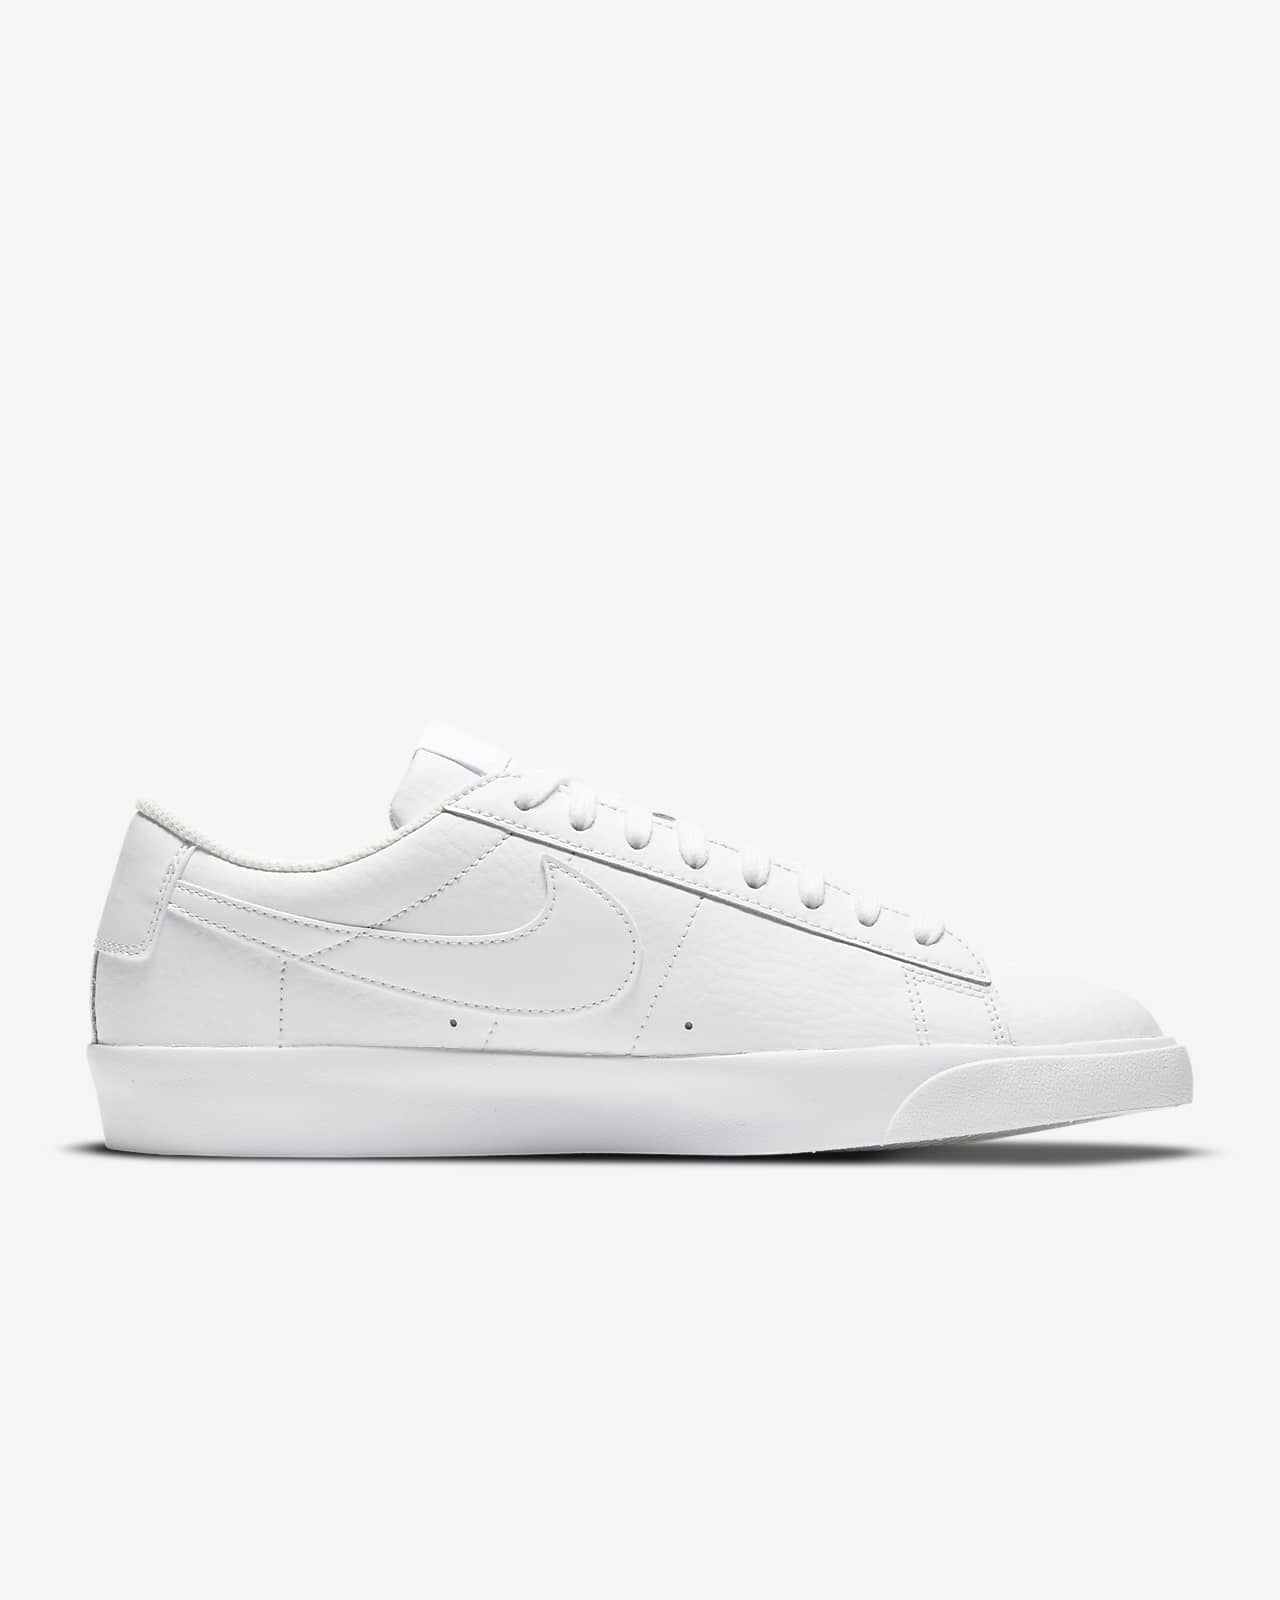 nike shoes white leather